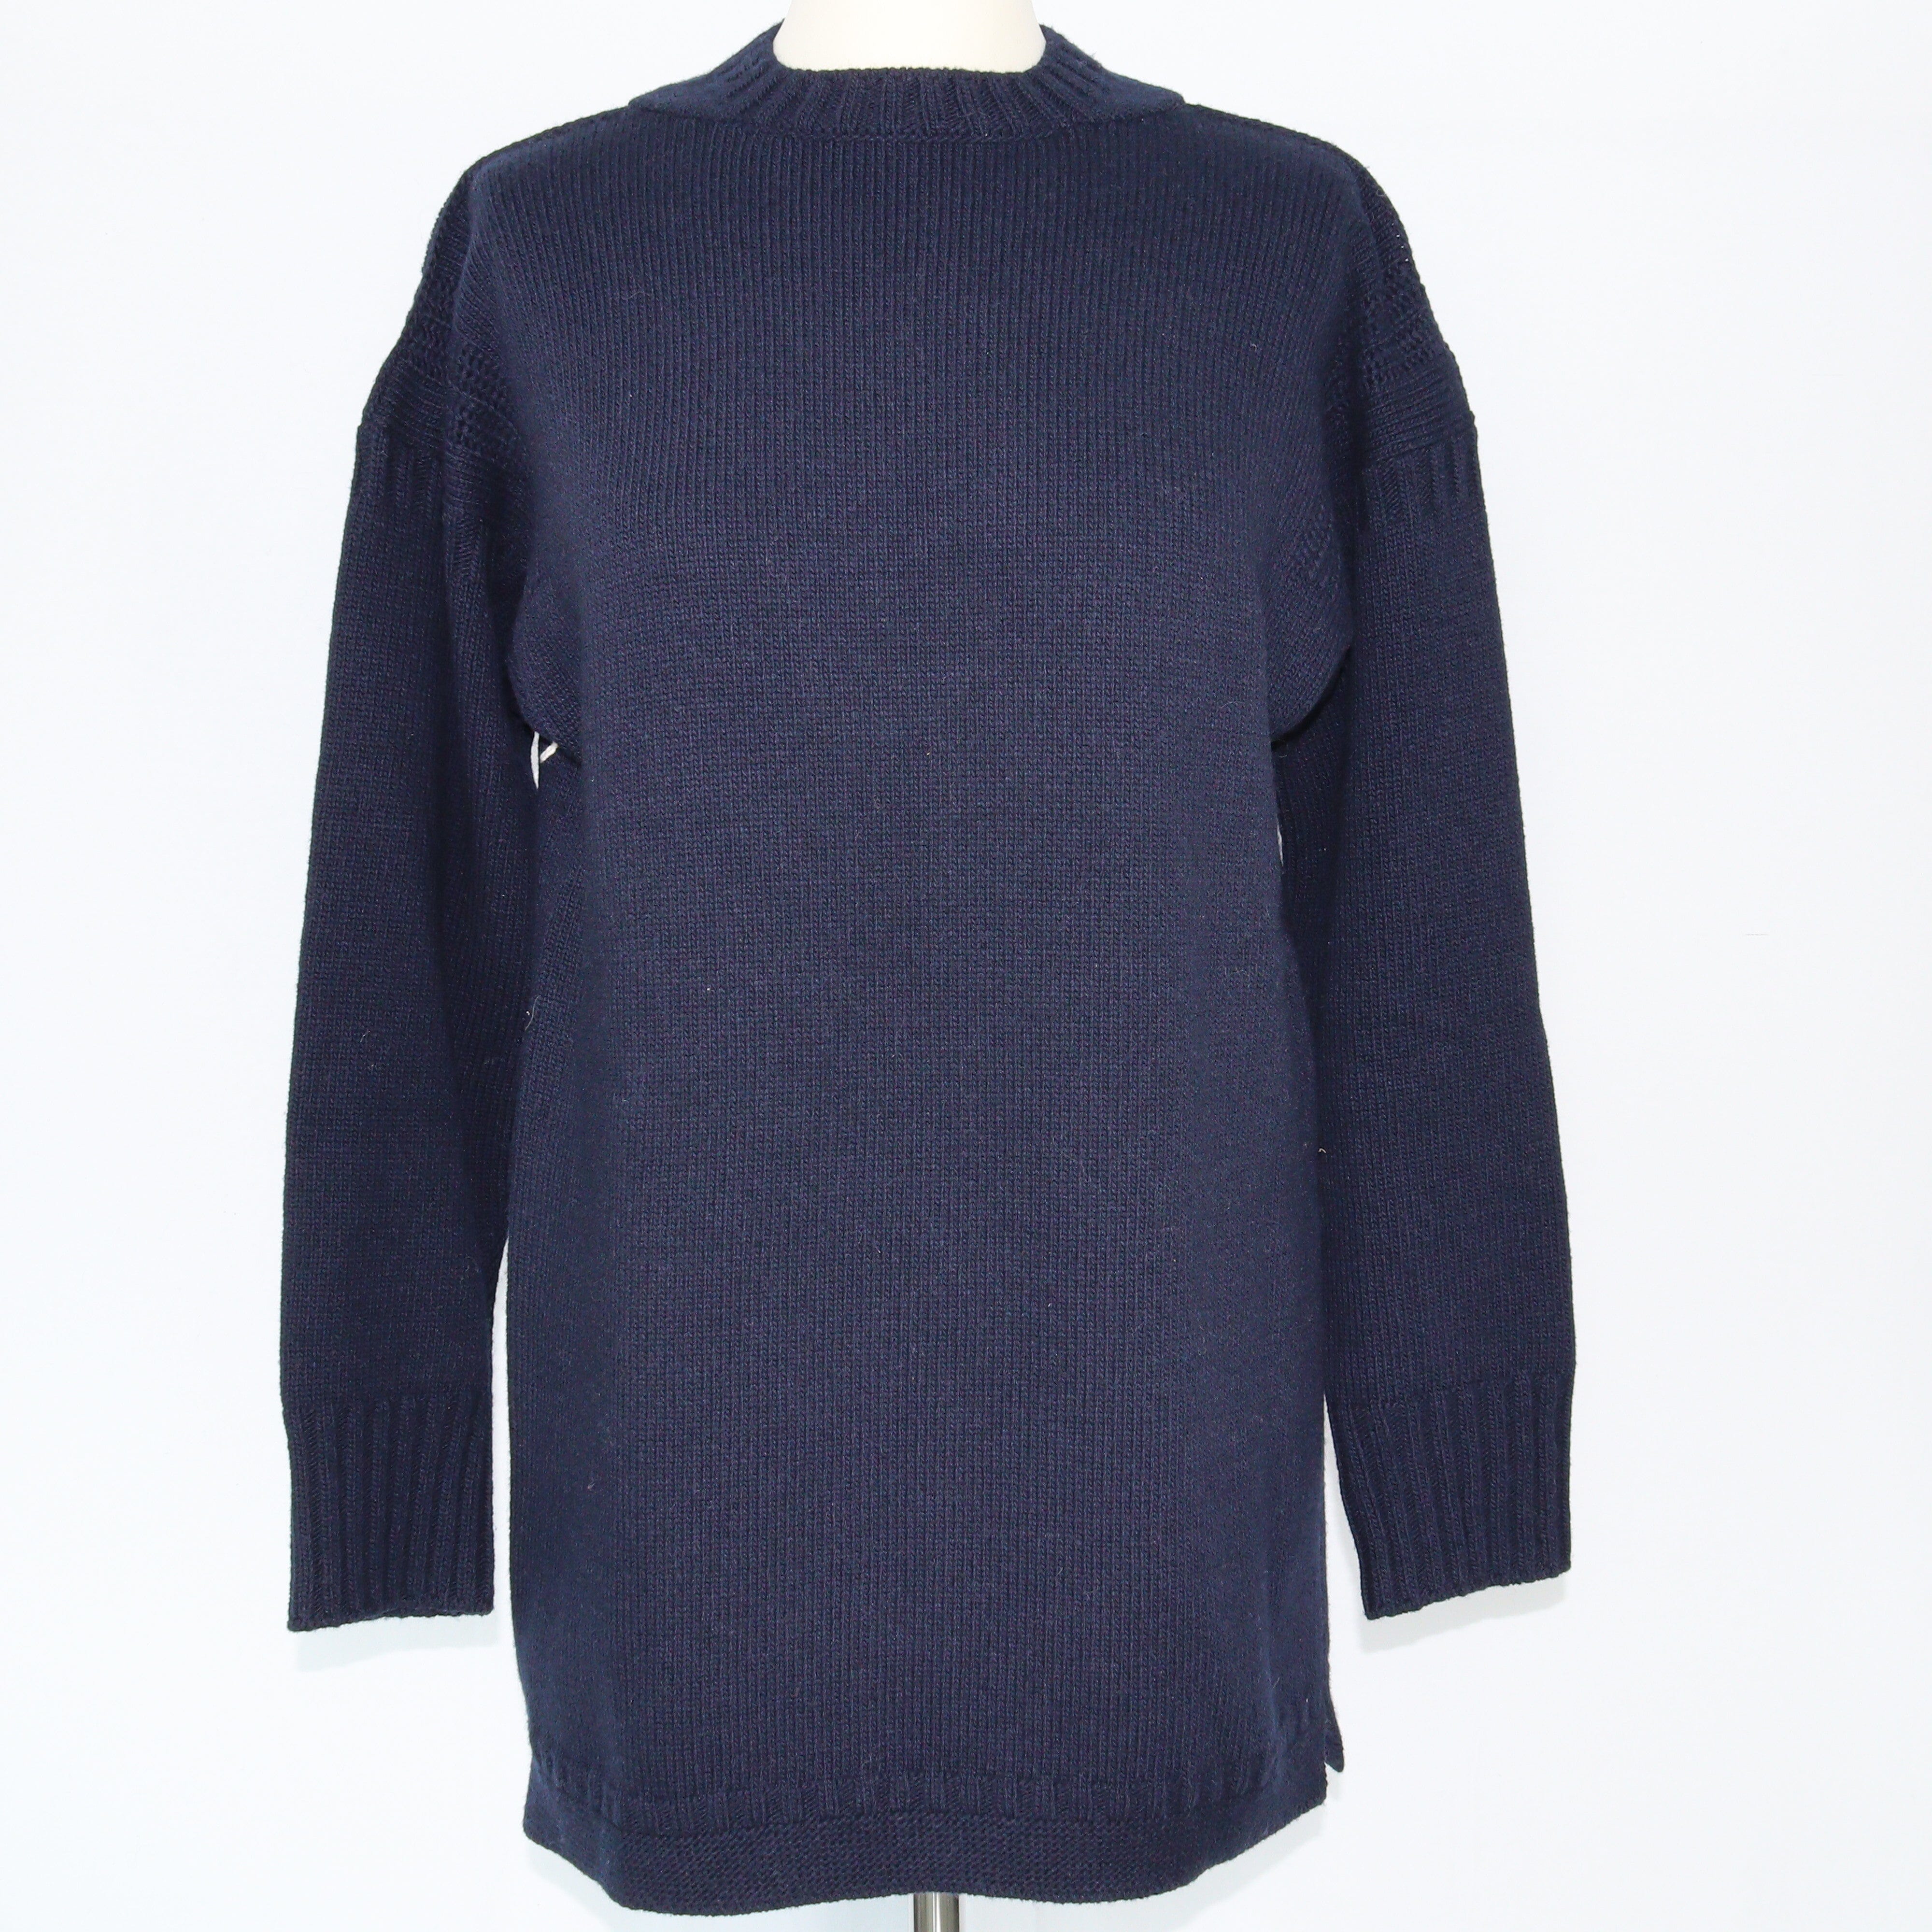 Navy Blue 'ID RATHER BE SAILING DIOR" Embroidered Sweater Clothings Dior 